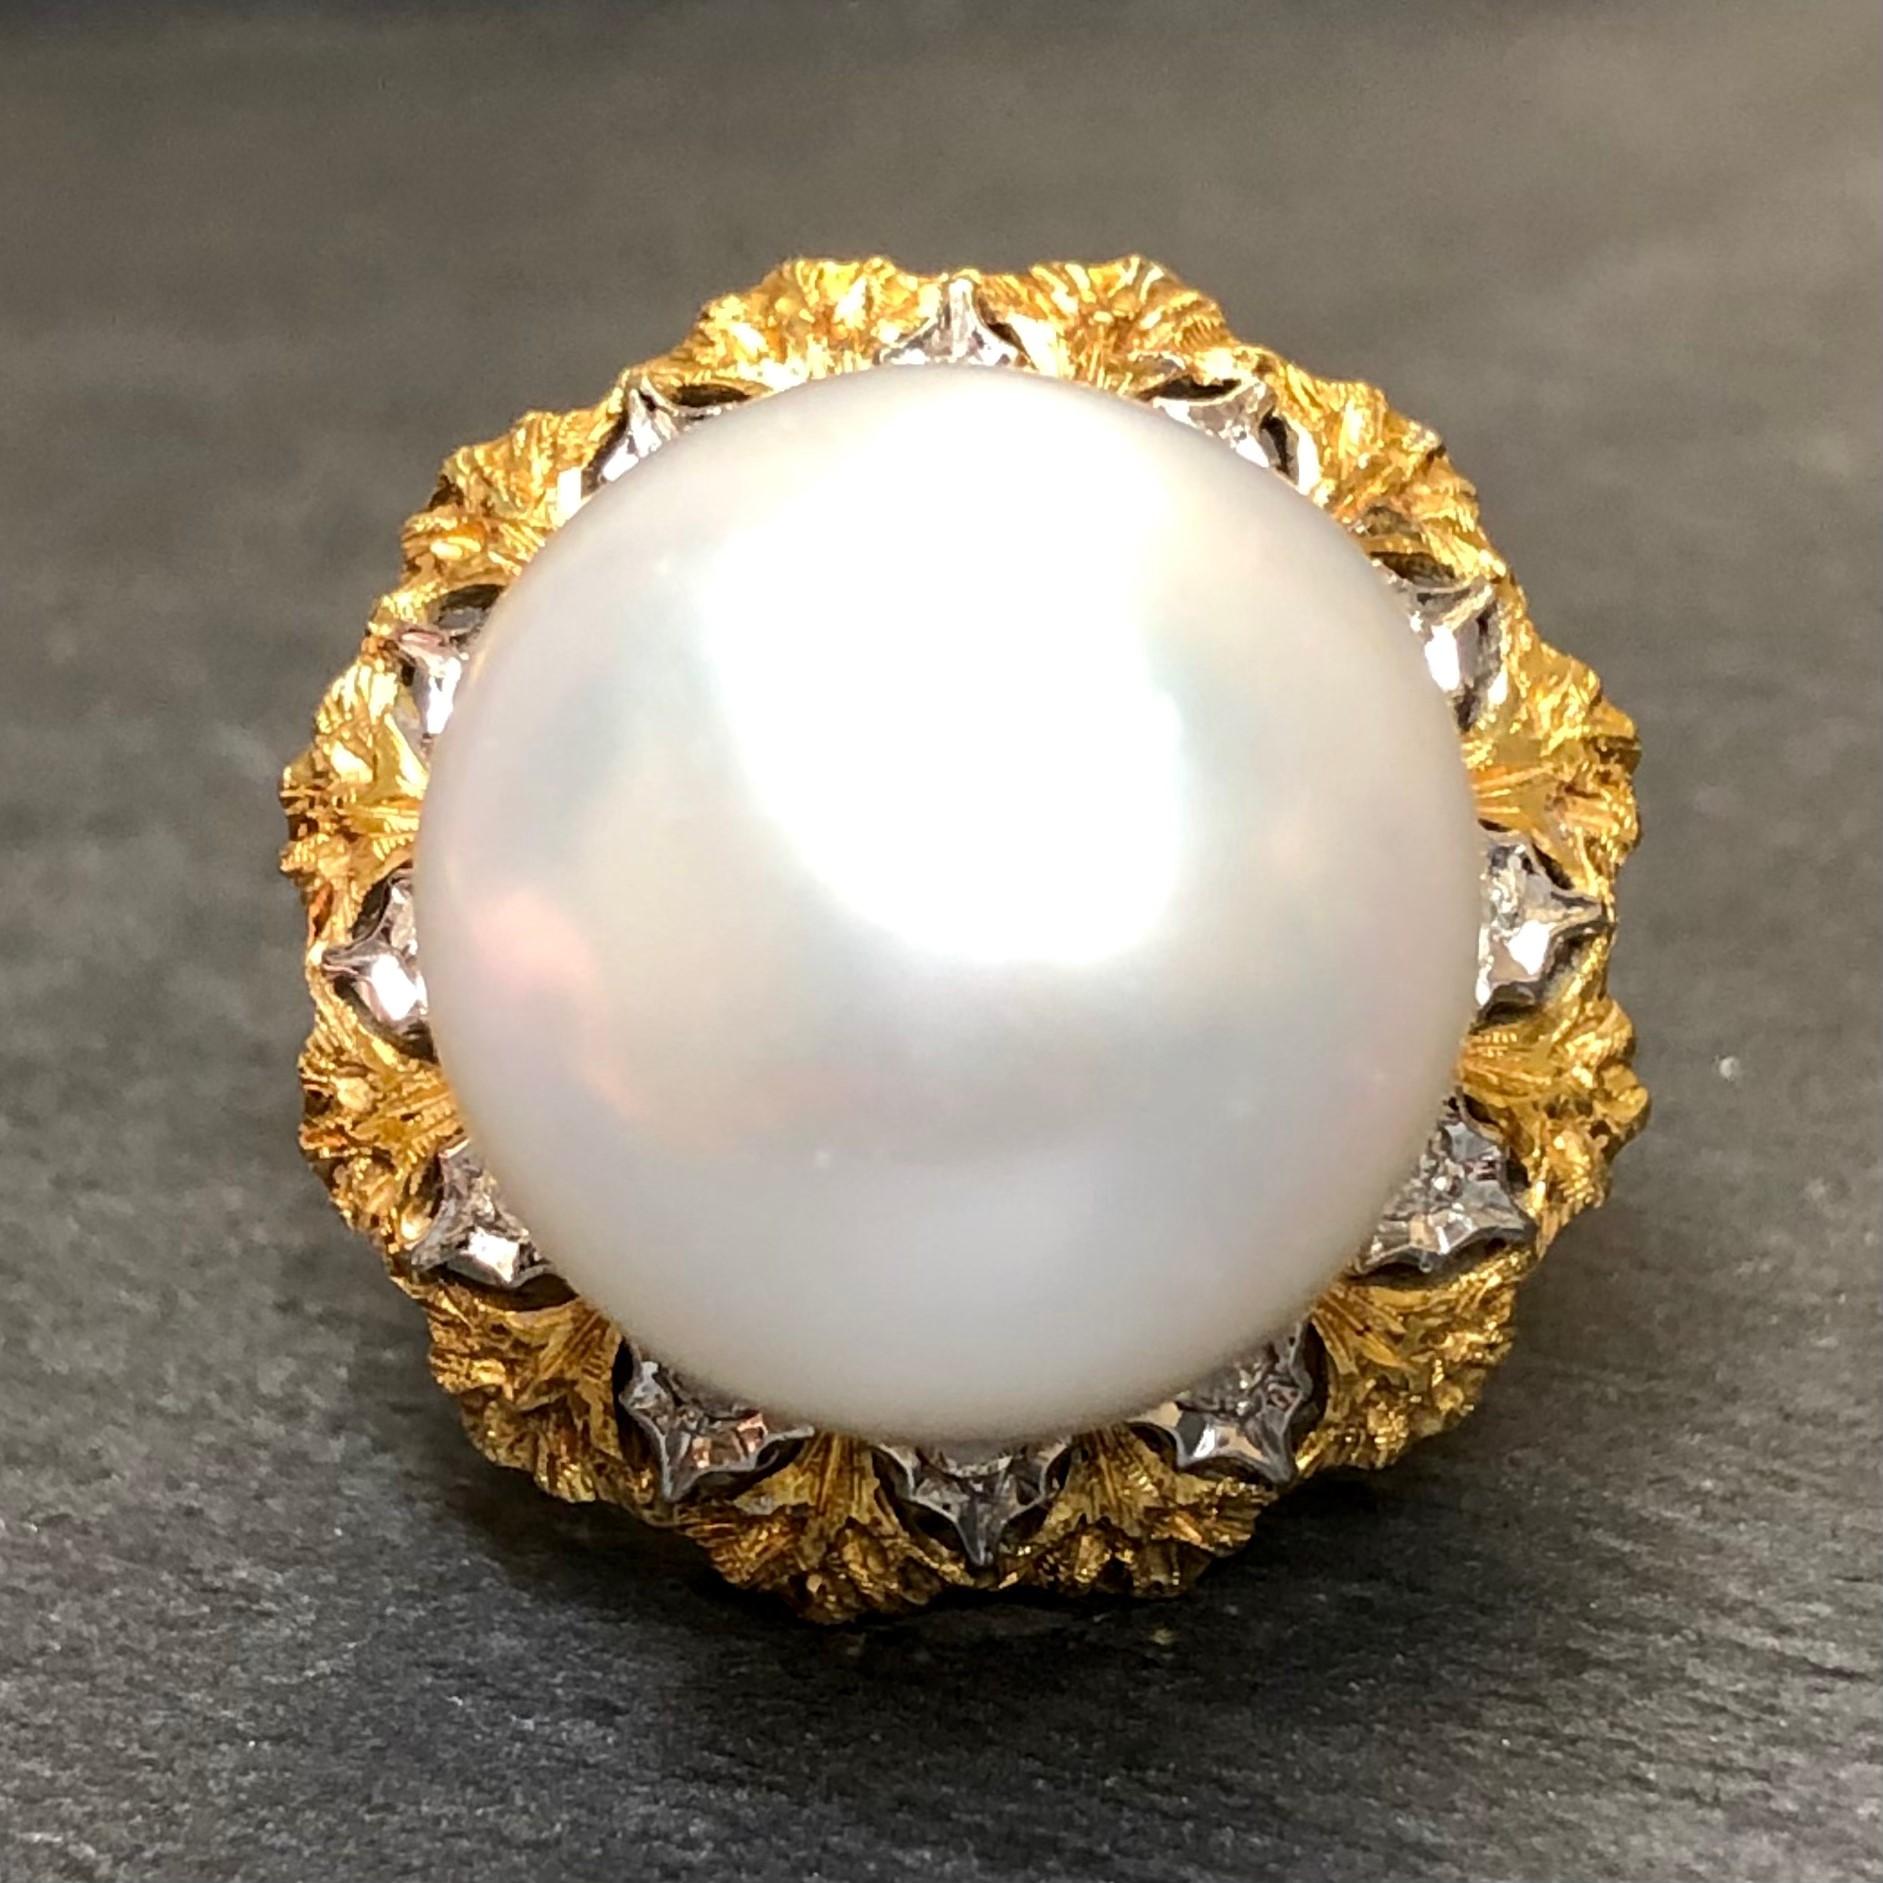 An incredible cocktail ring with the focal point being a very large 17mm cream-colored South Sea pearl with very minor surface blemishes as well as approximately .33cttw in G-H color Vs clarity round diamonds. The textural nature of this piece is